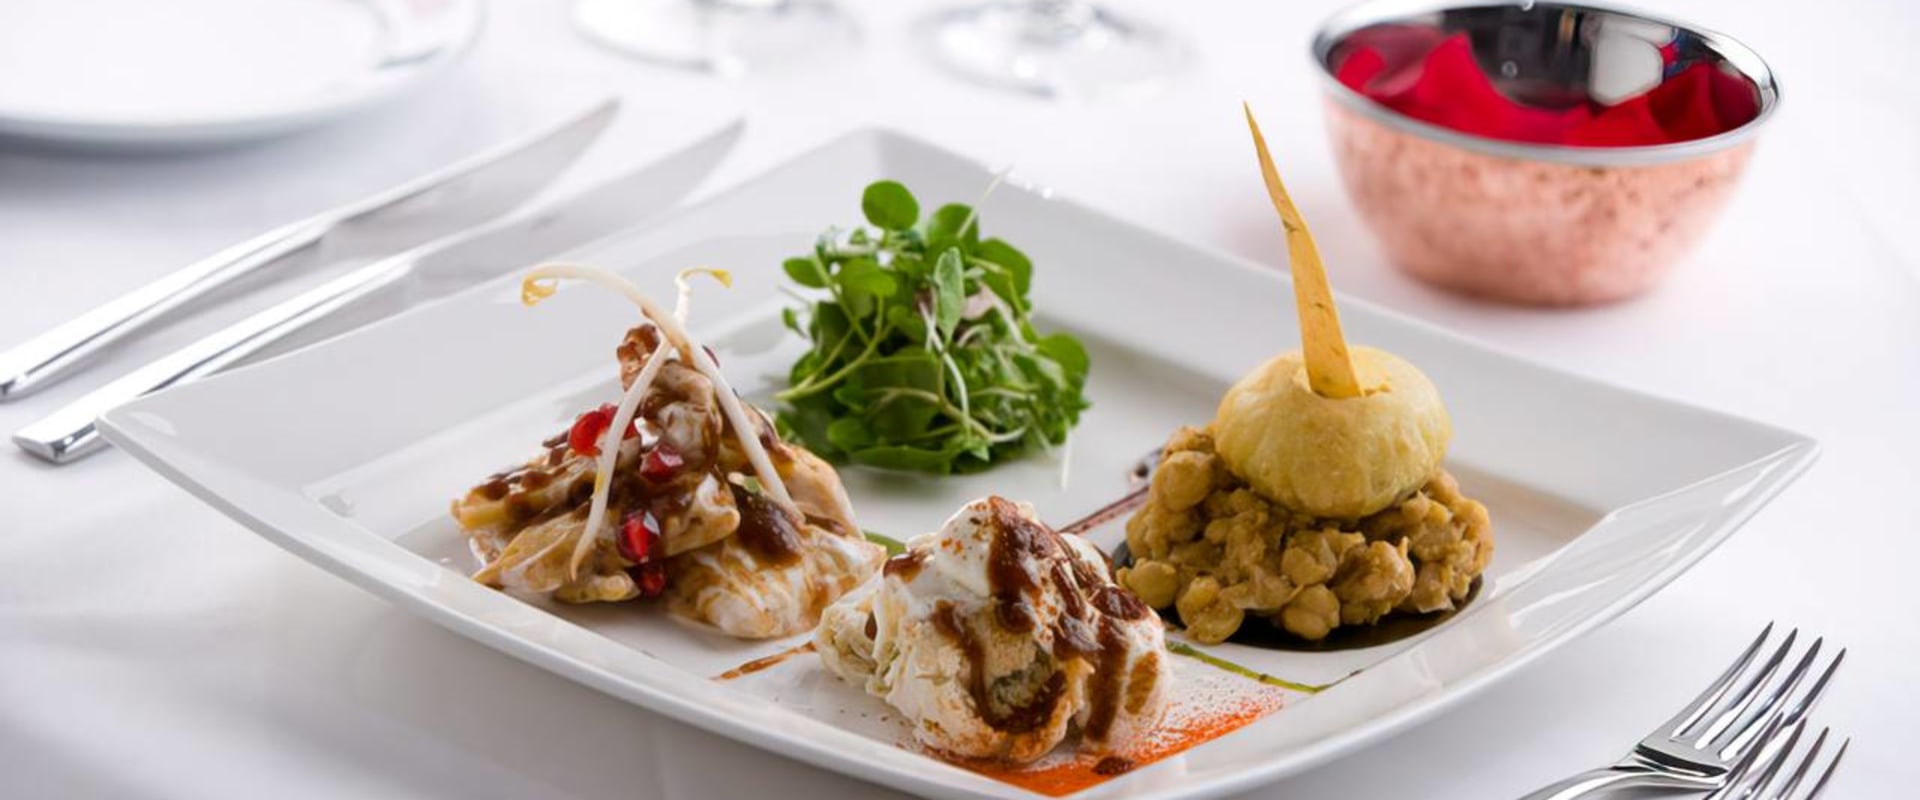 High-end Restaurants in Crawley: An Overview